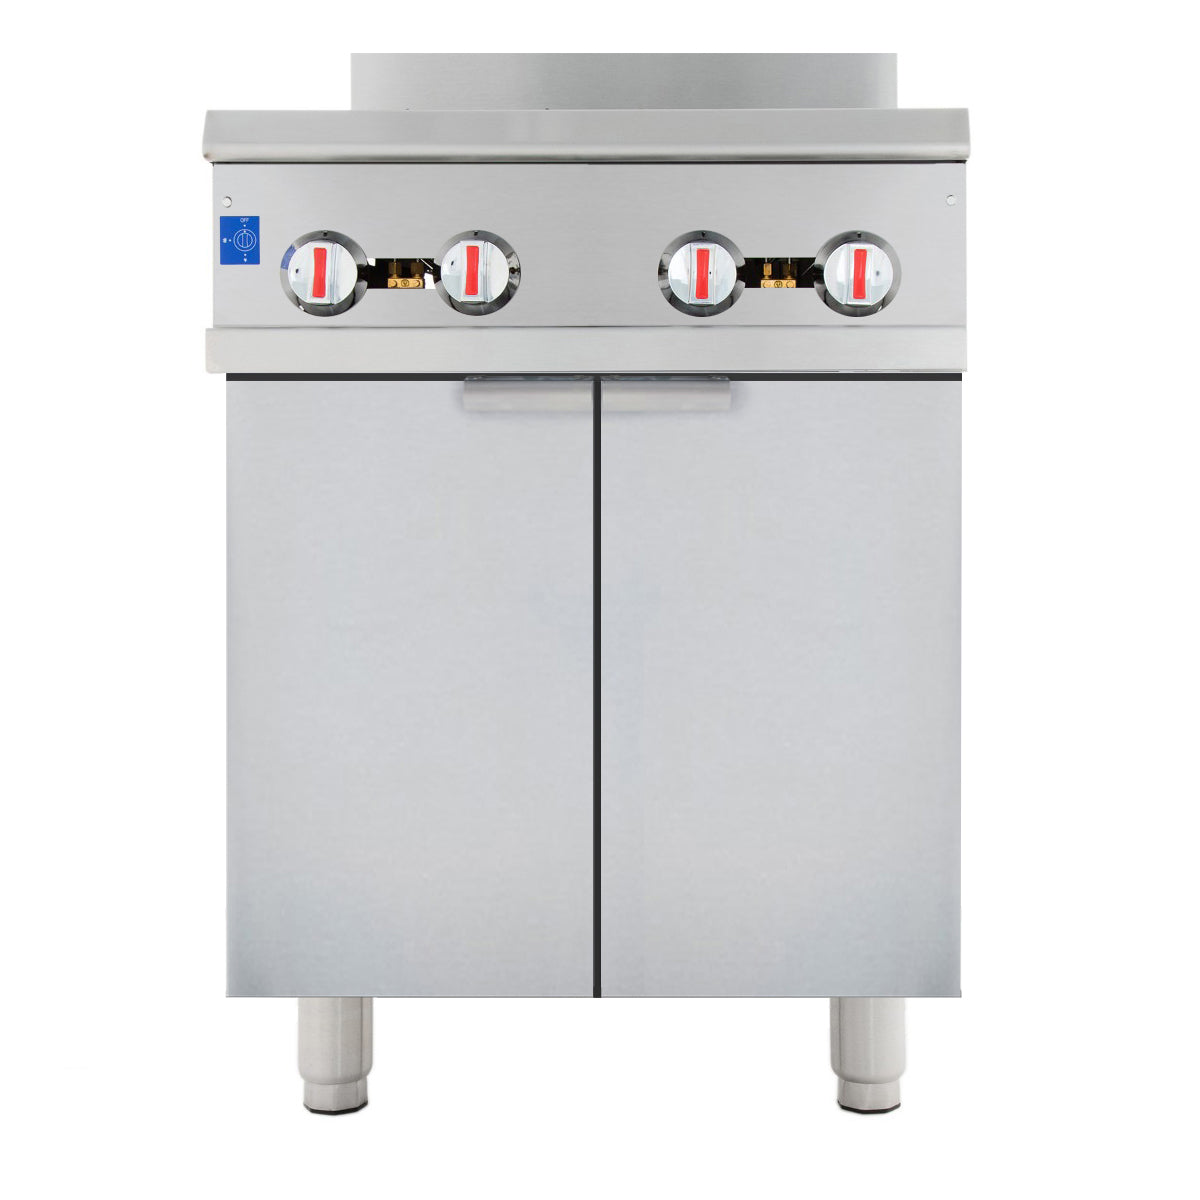 Empura EGR-24FC 24" Wide Commercial Gas Range 4 Top Burners With Storage Space and 2 Swing Doors